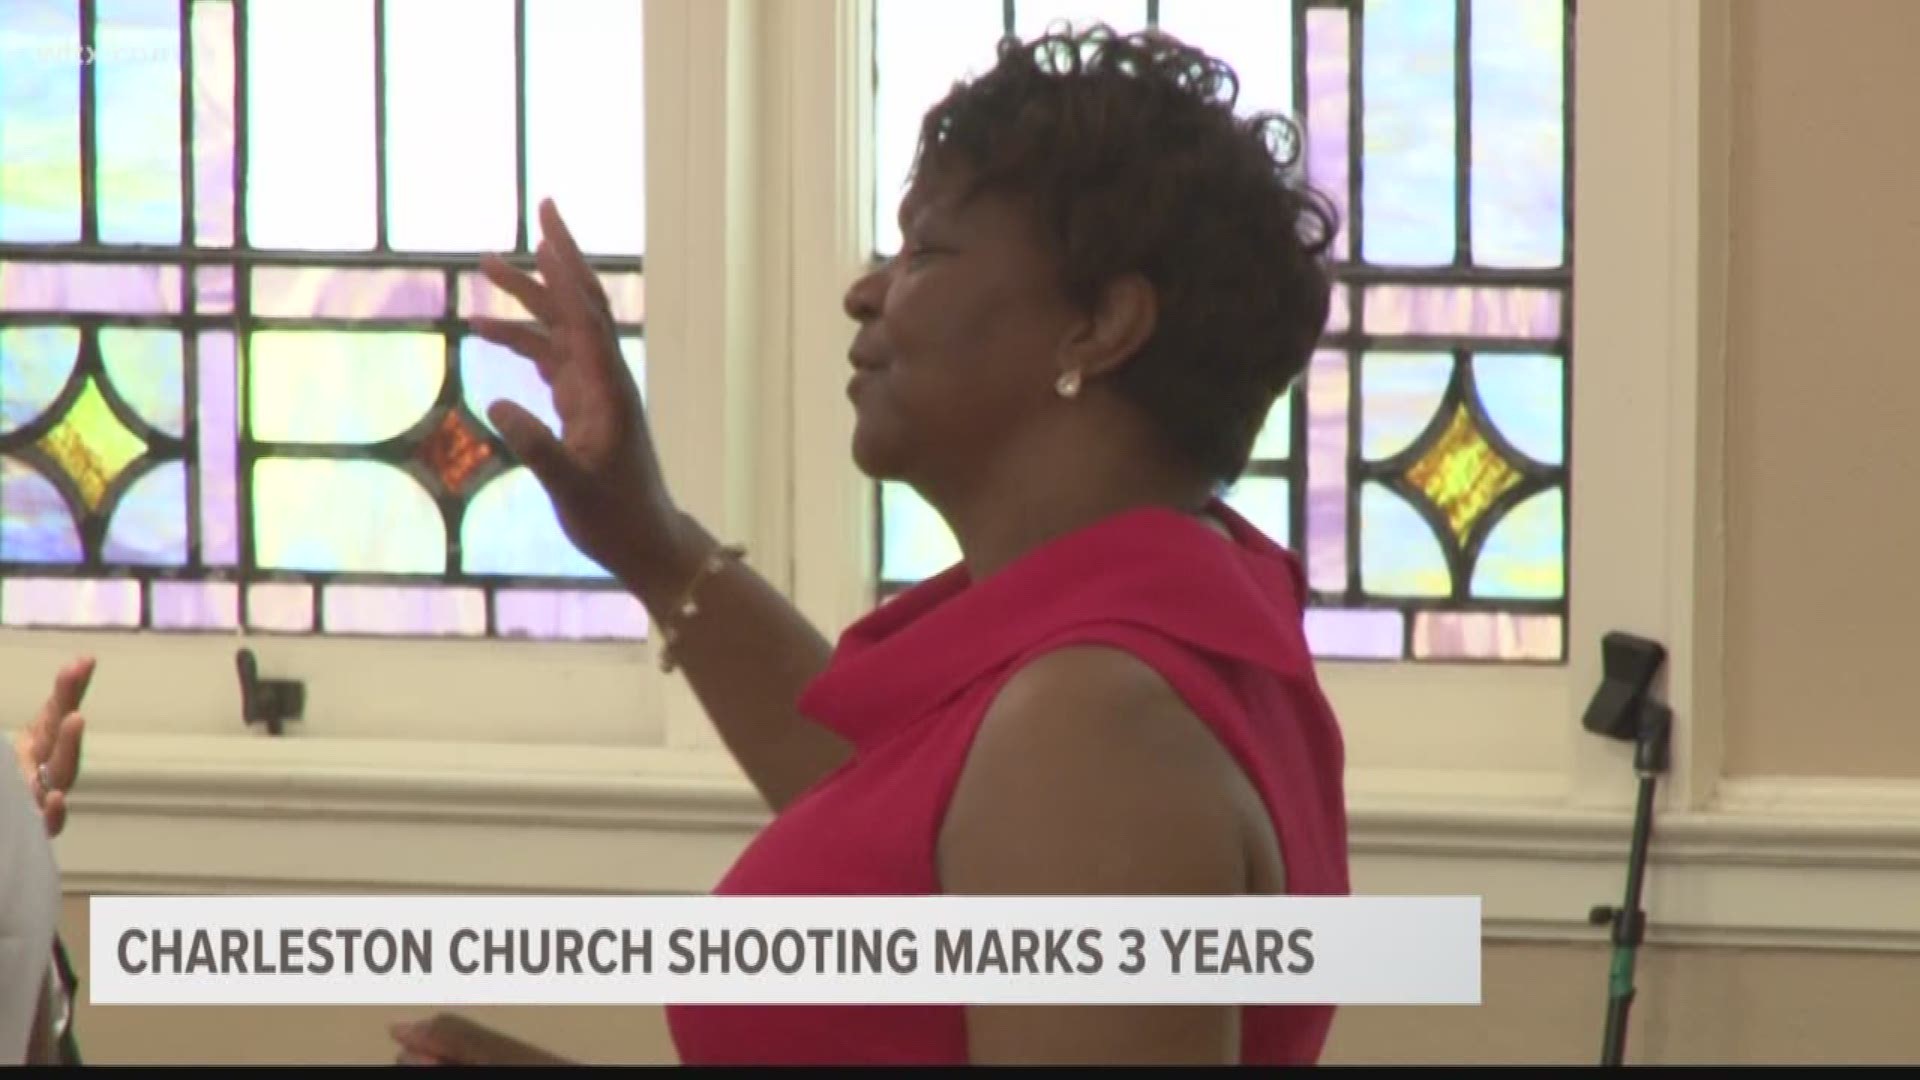 Bethel AME Church in Columbia remembers nine people killed at Mother Emanuel AME Church in Charleston, three years ago today.